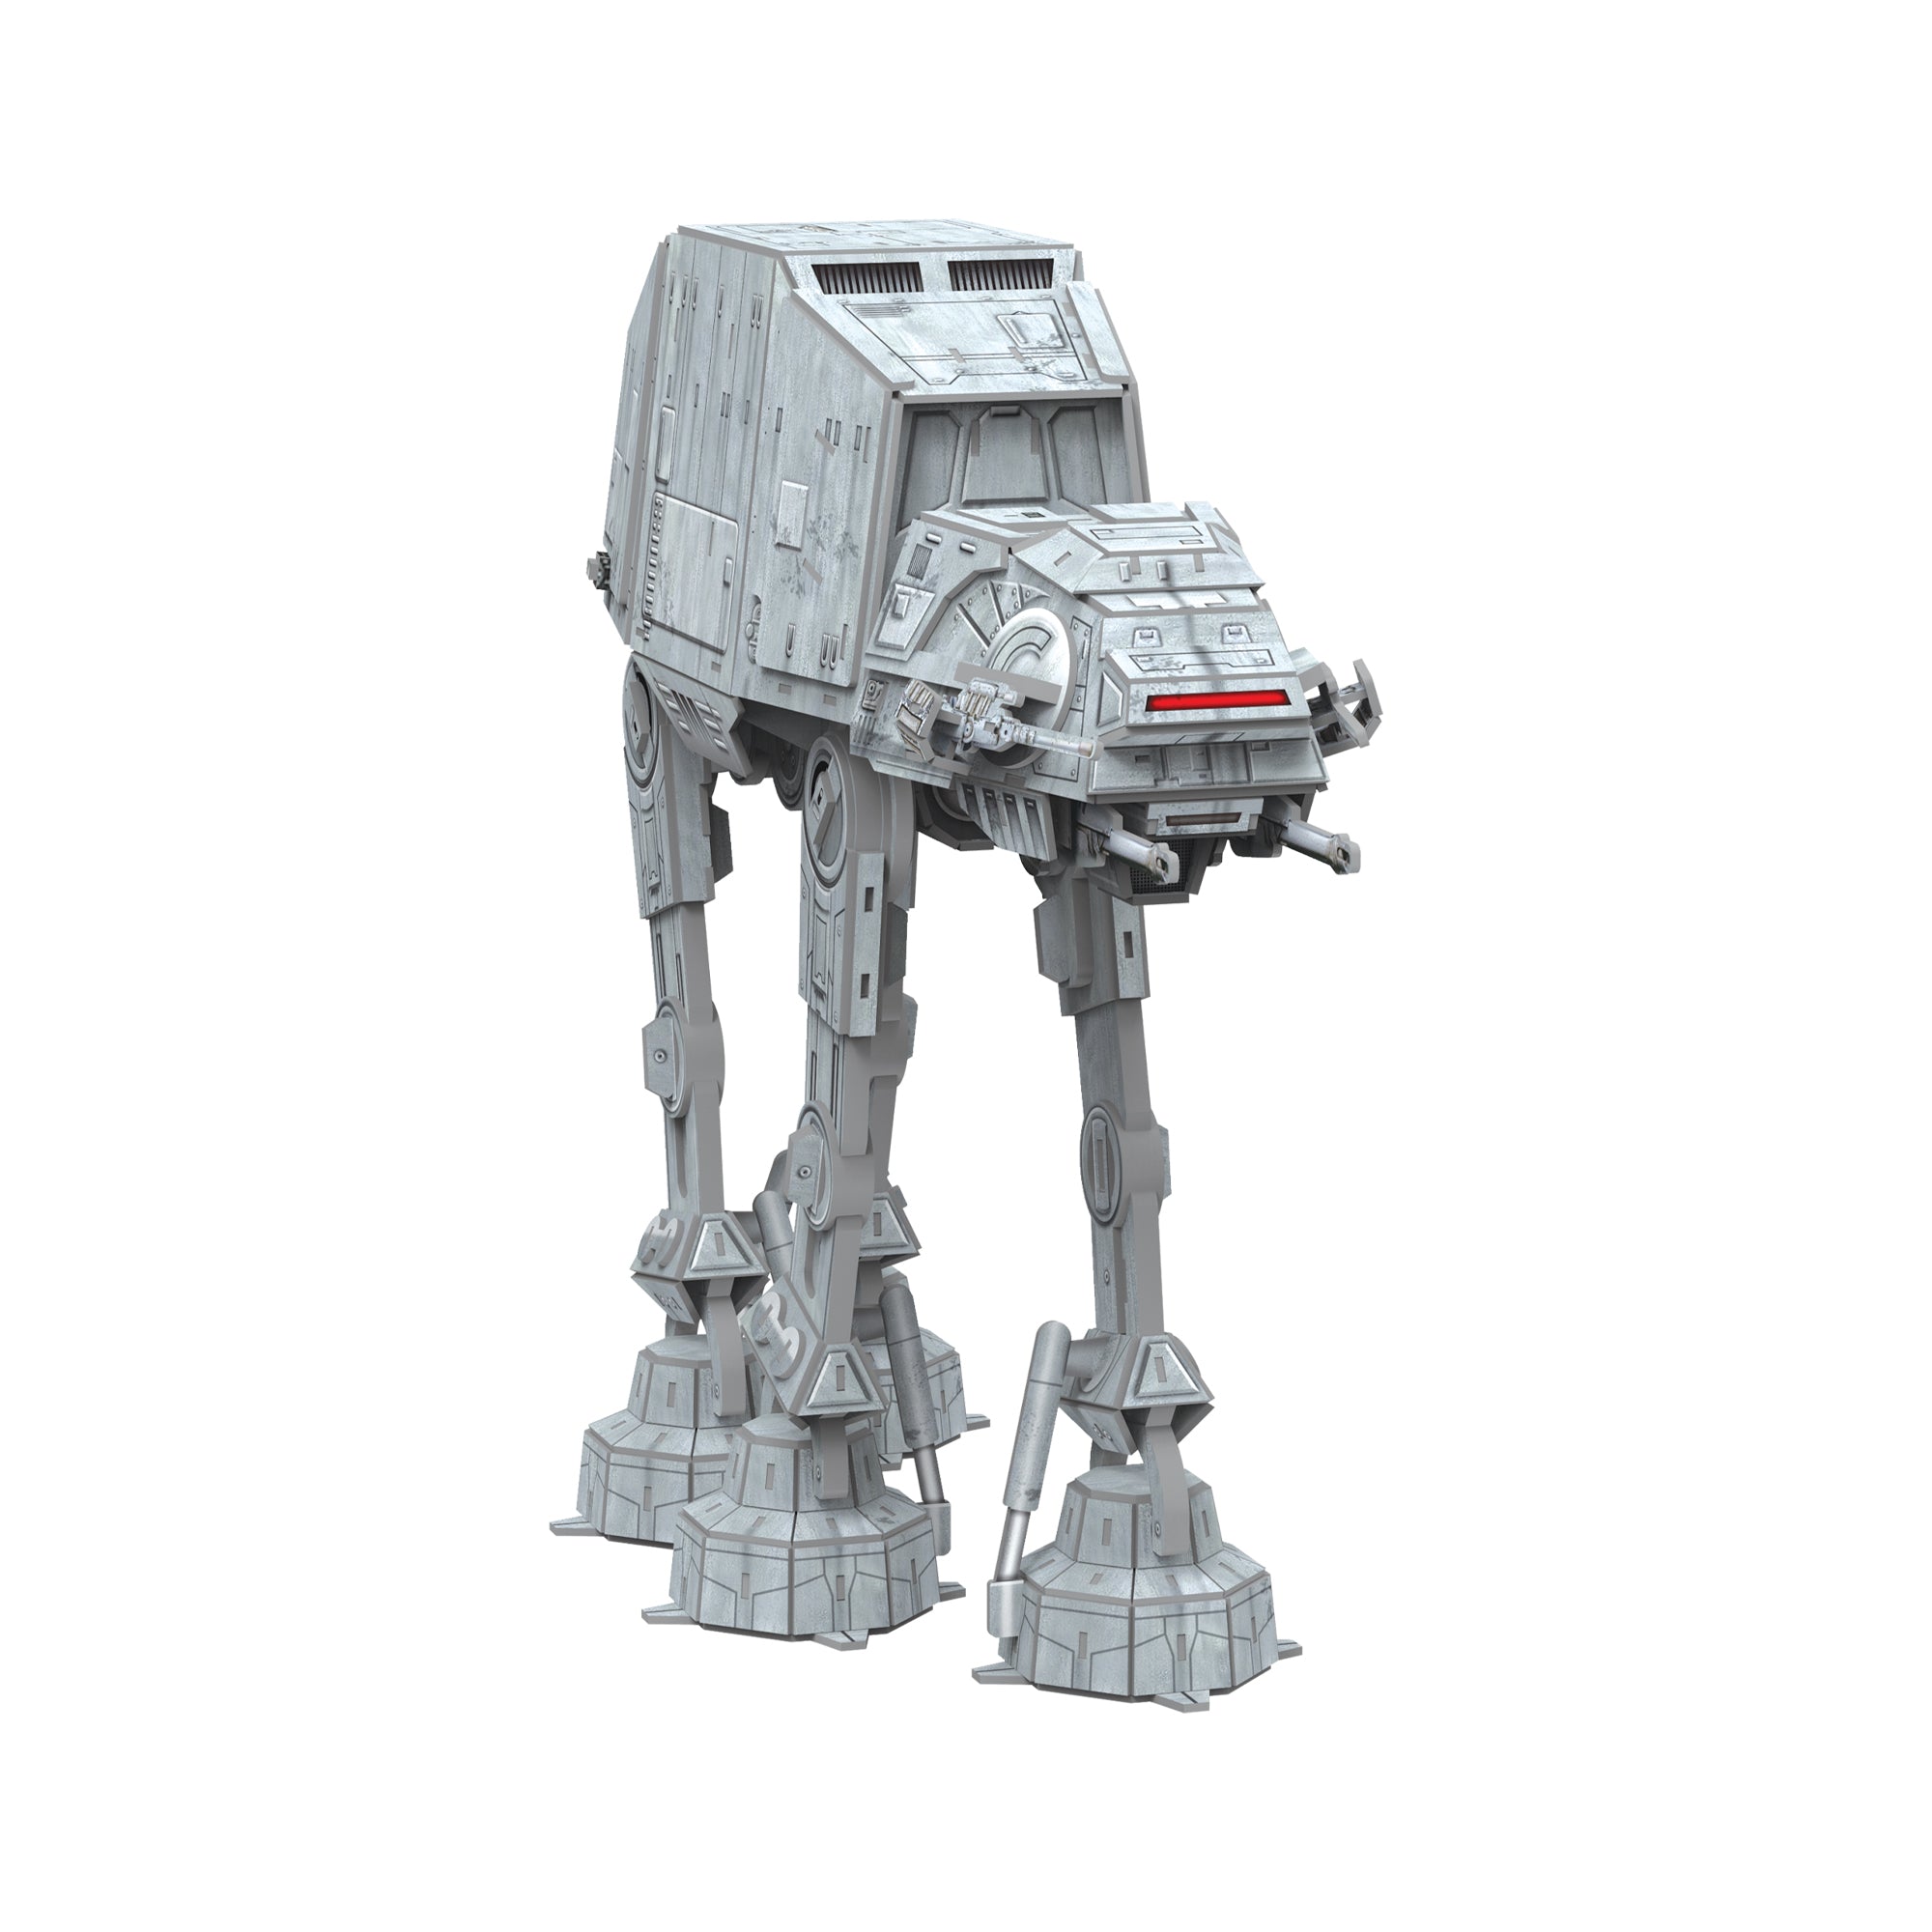 Star Wars Imperial AT-AT 3D Puzzle 42.2 CM